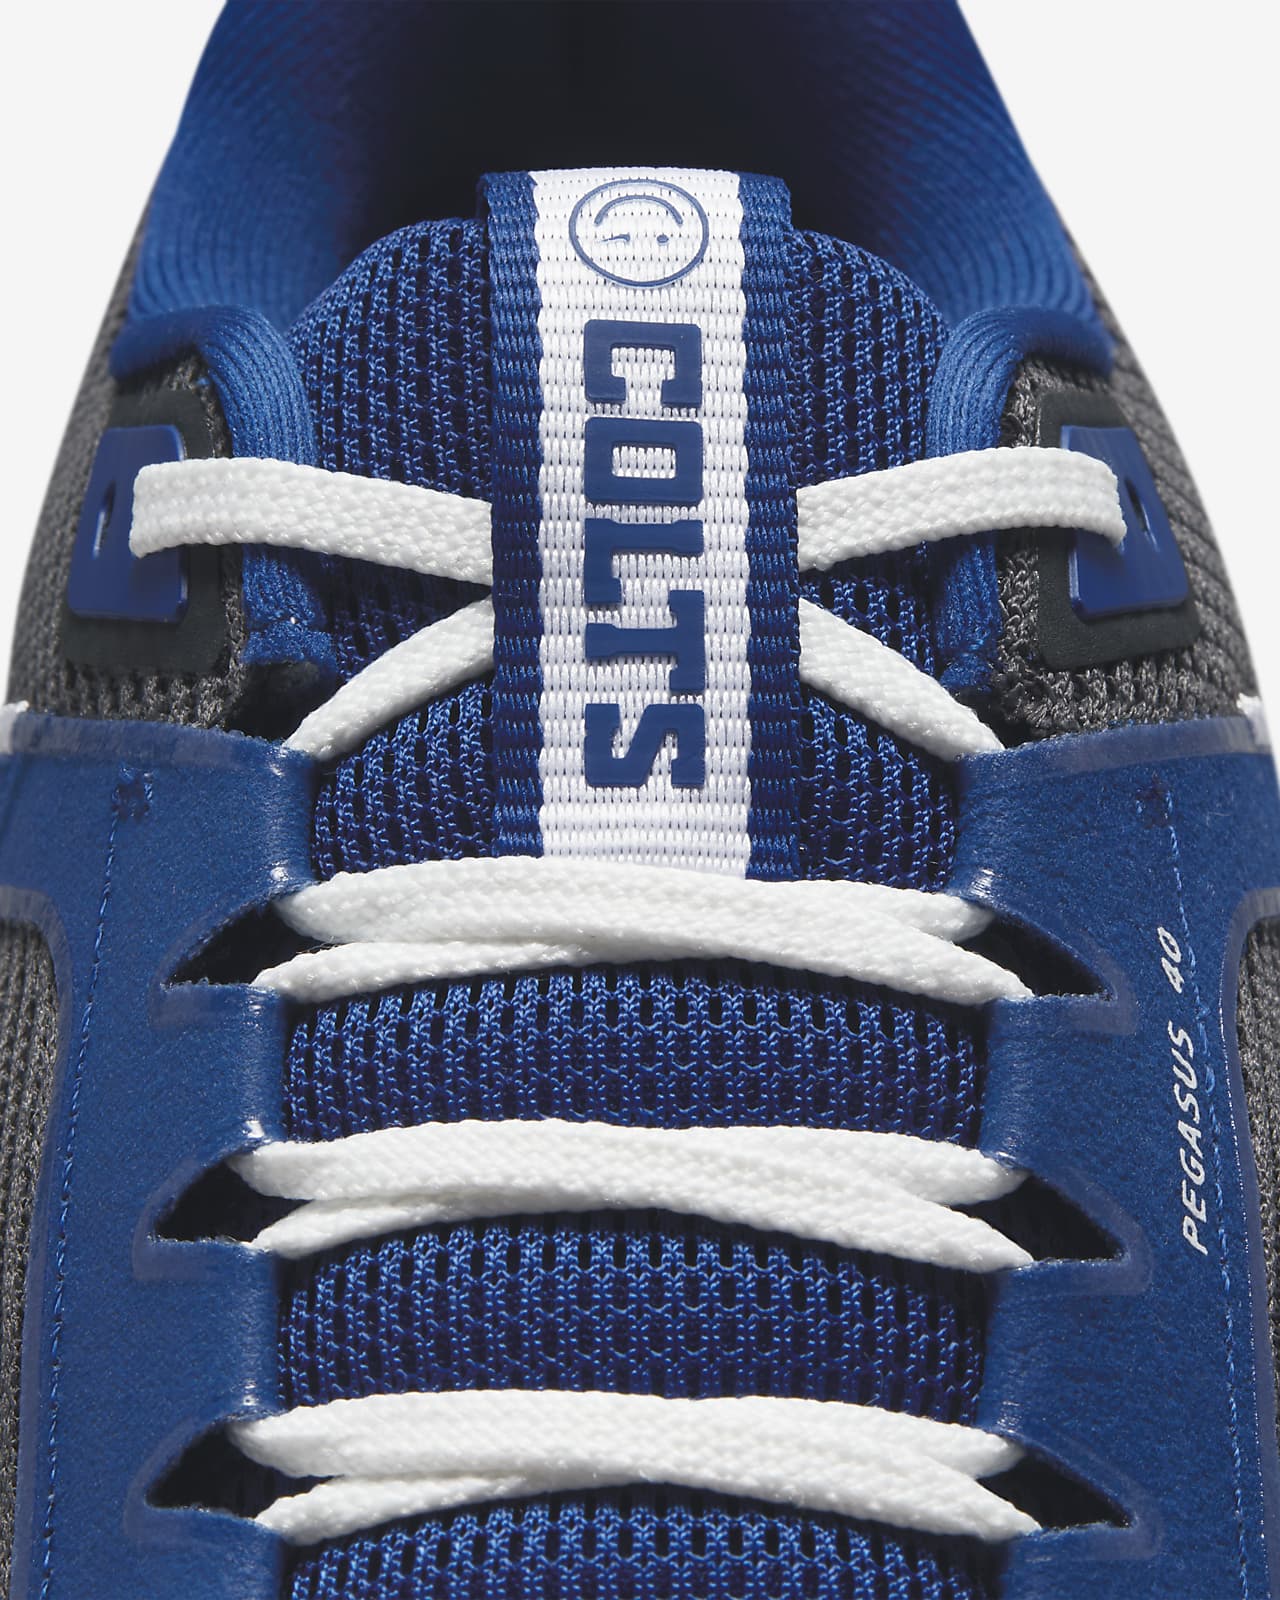 Nike Pegasus 40 (NFL Indianapolis Colts) Men's Road Running Shoes.